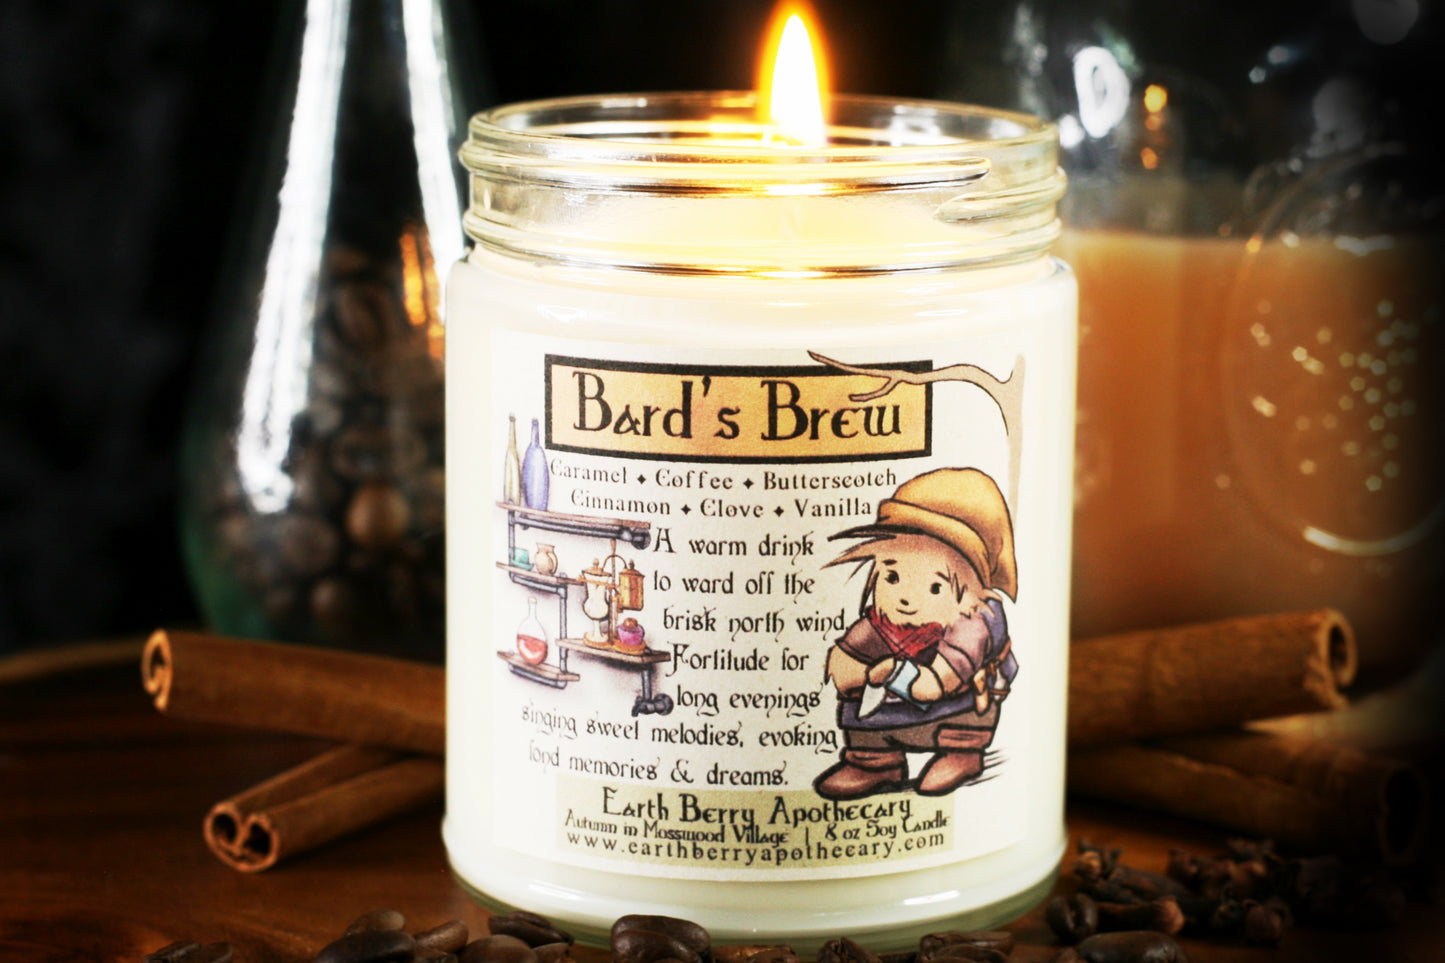 Bards brew candle has a fantasy tavern bar with a kind hedgehog bartender wiping a clean glass. The scent is coffee caramel butterscotch cinnamon clove and vanilla